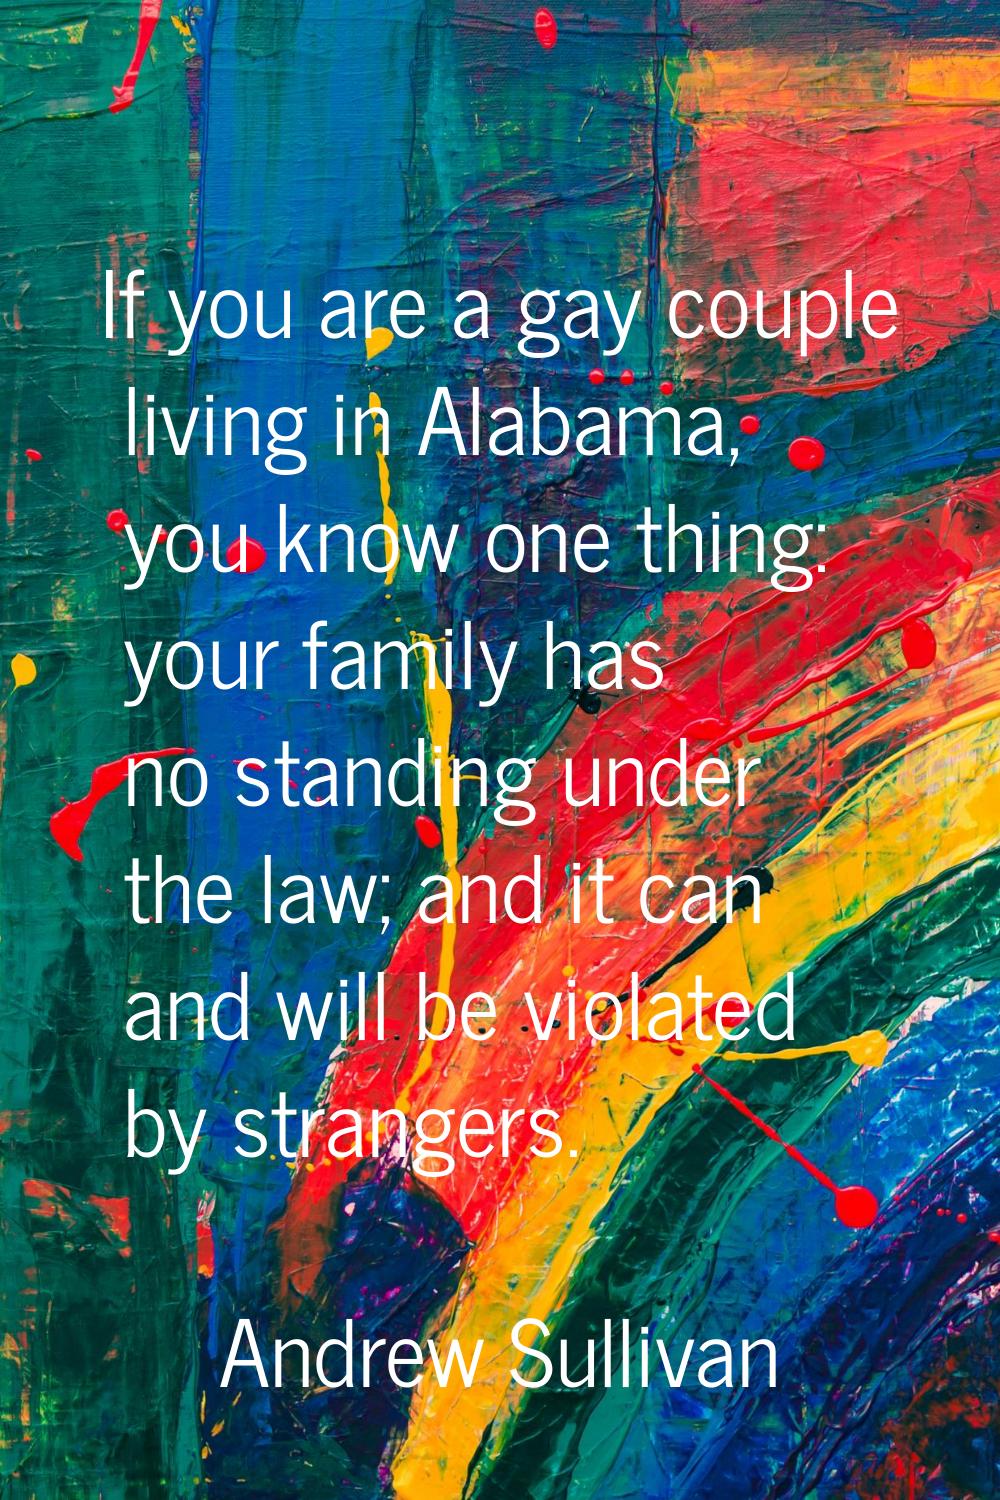 If you are a gay couple living in Alabama, you know one thing: your family has no standing under th